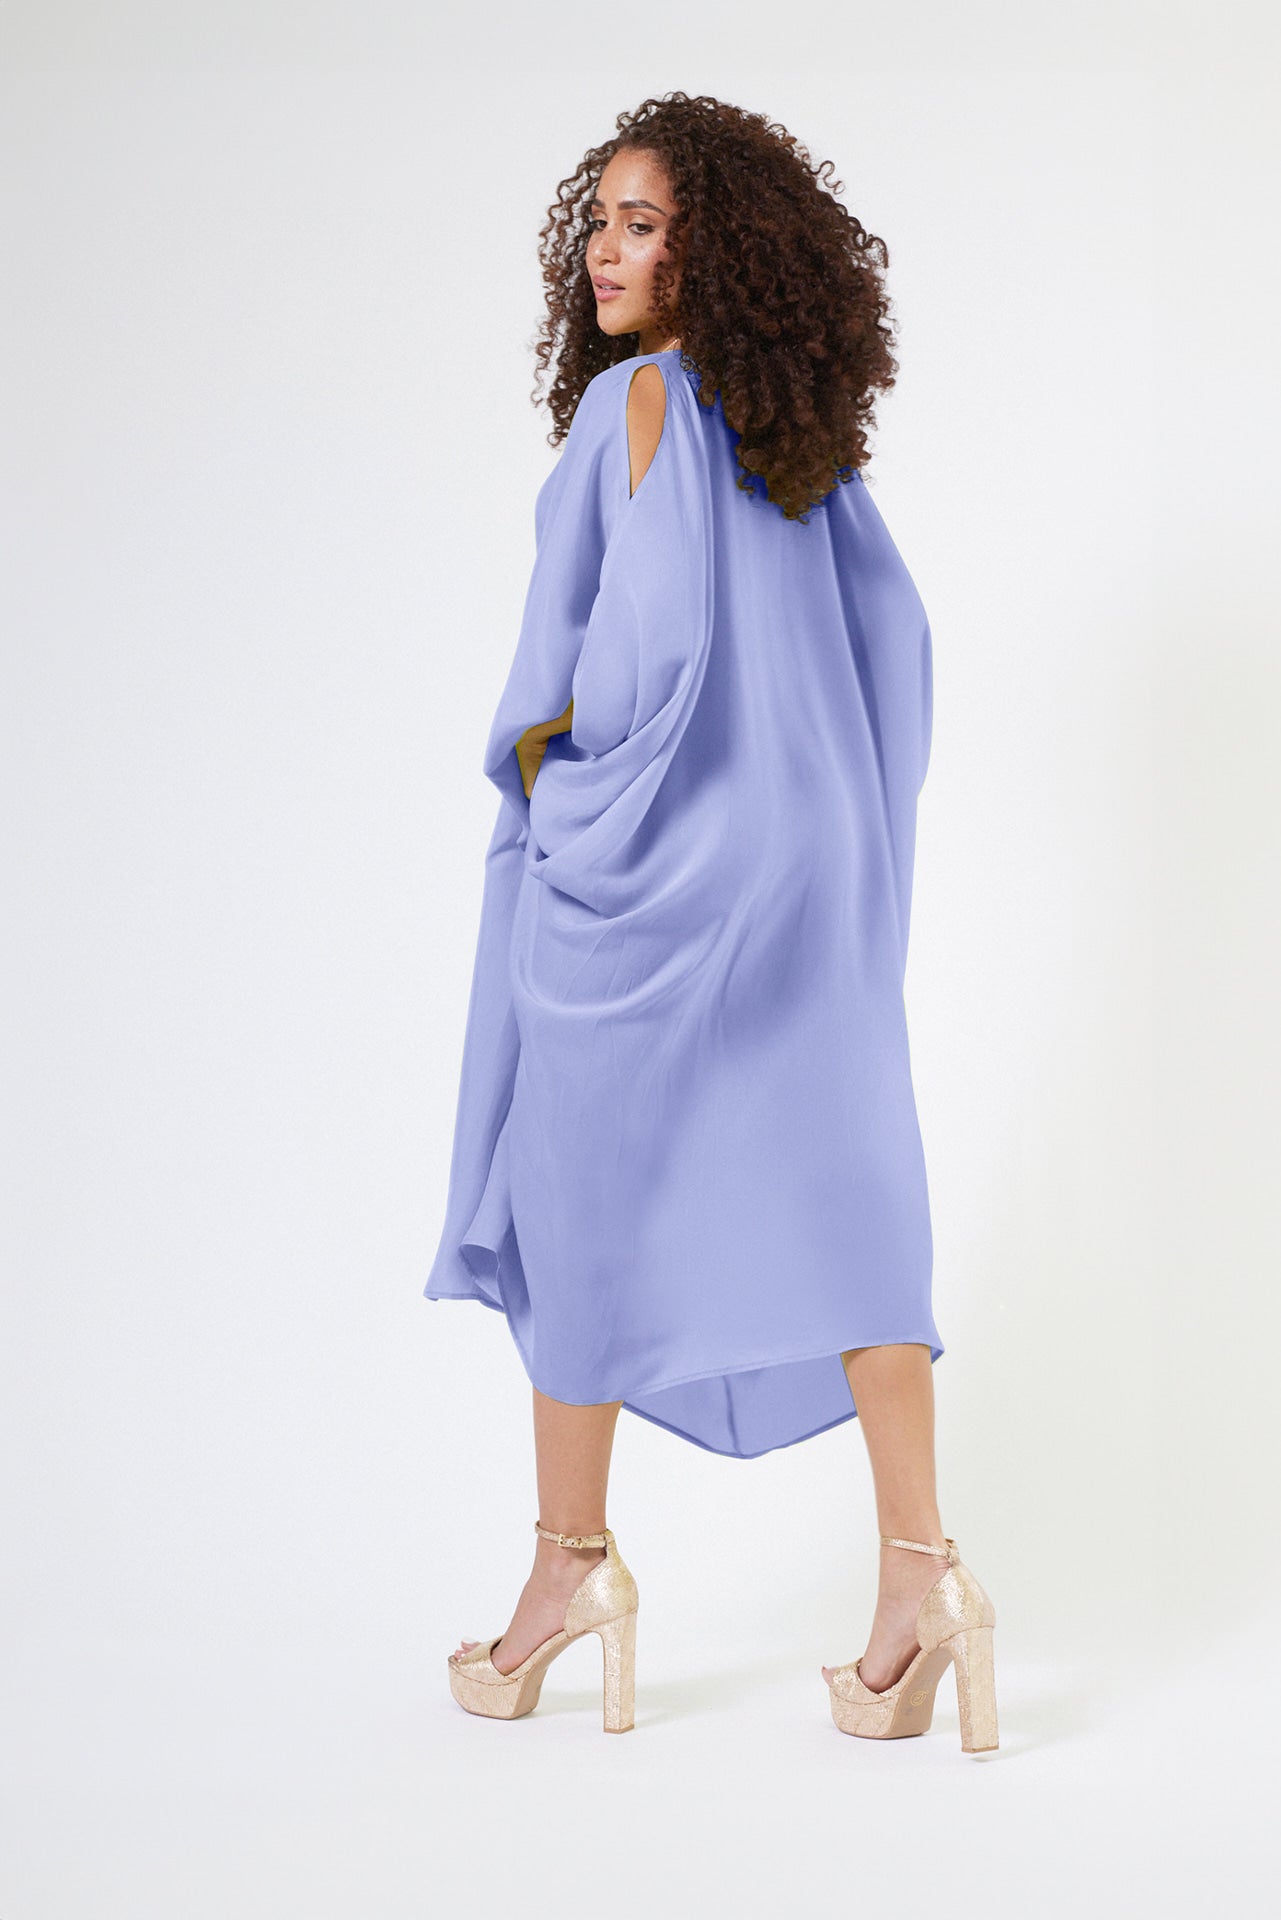 side view of woman modelling a lavender kaftan duster with front zipper made from recycled materials